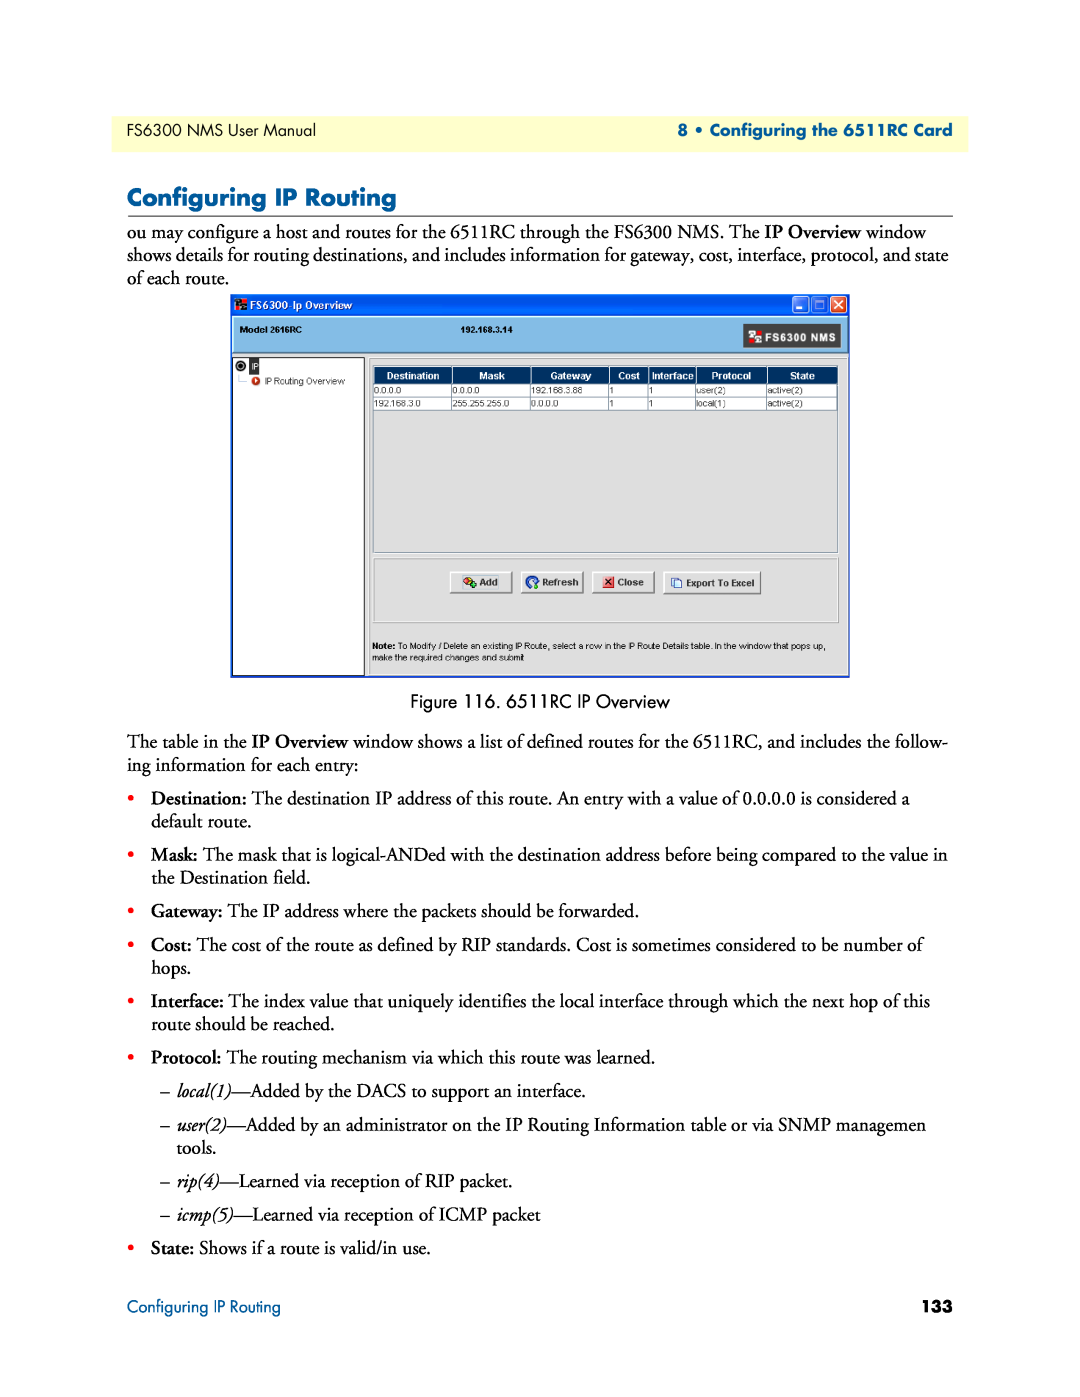 Patton electronic 6300 user manual Configuring IP Routing, 6511RC IP Overview 